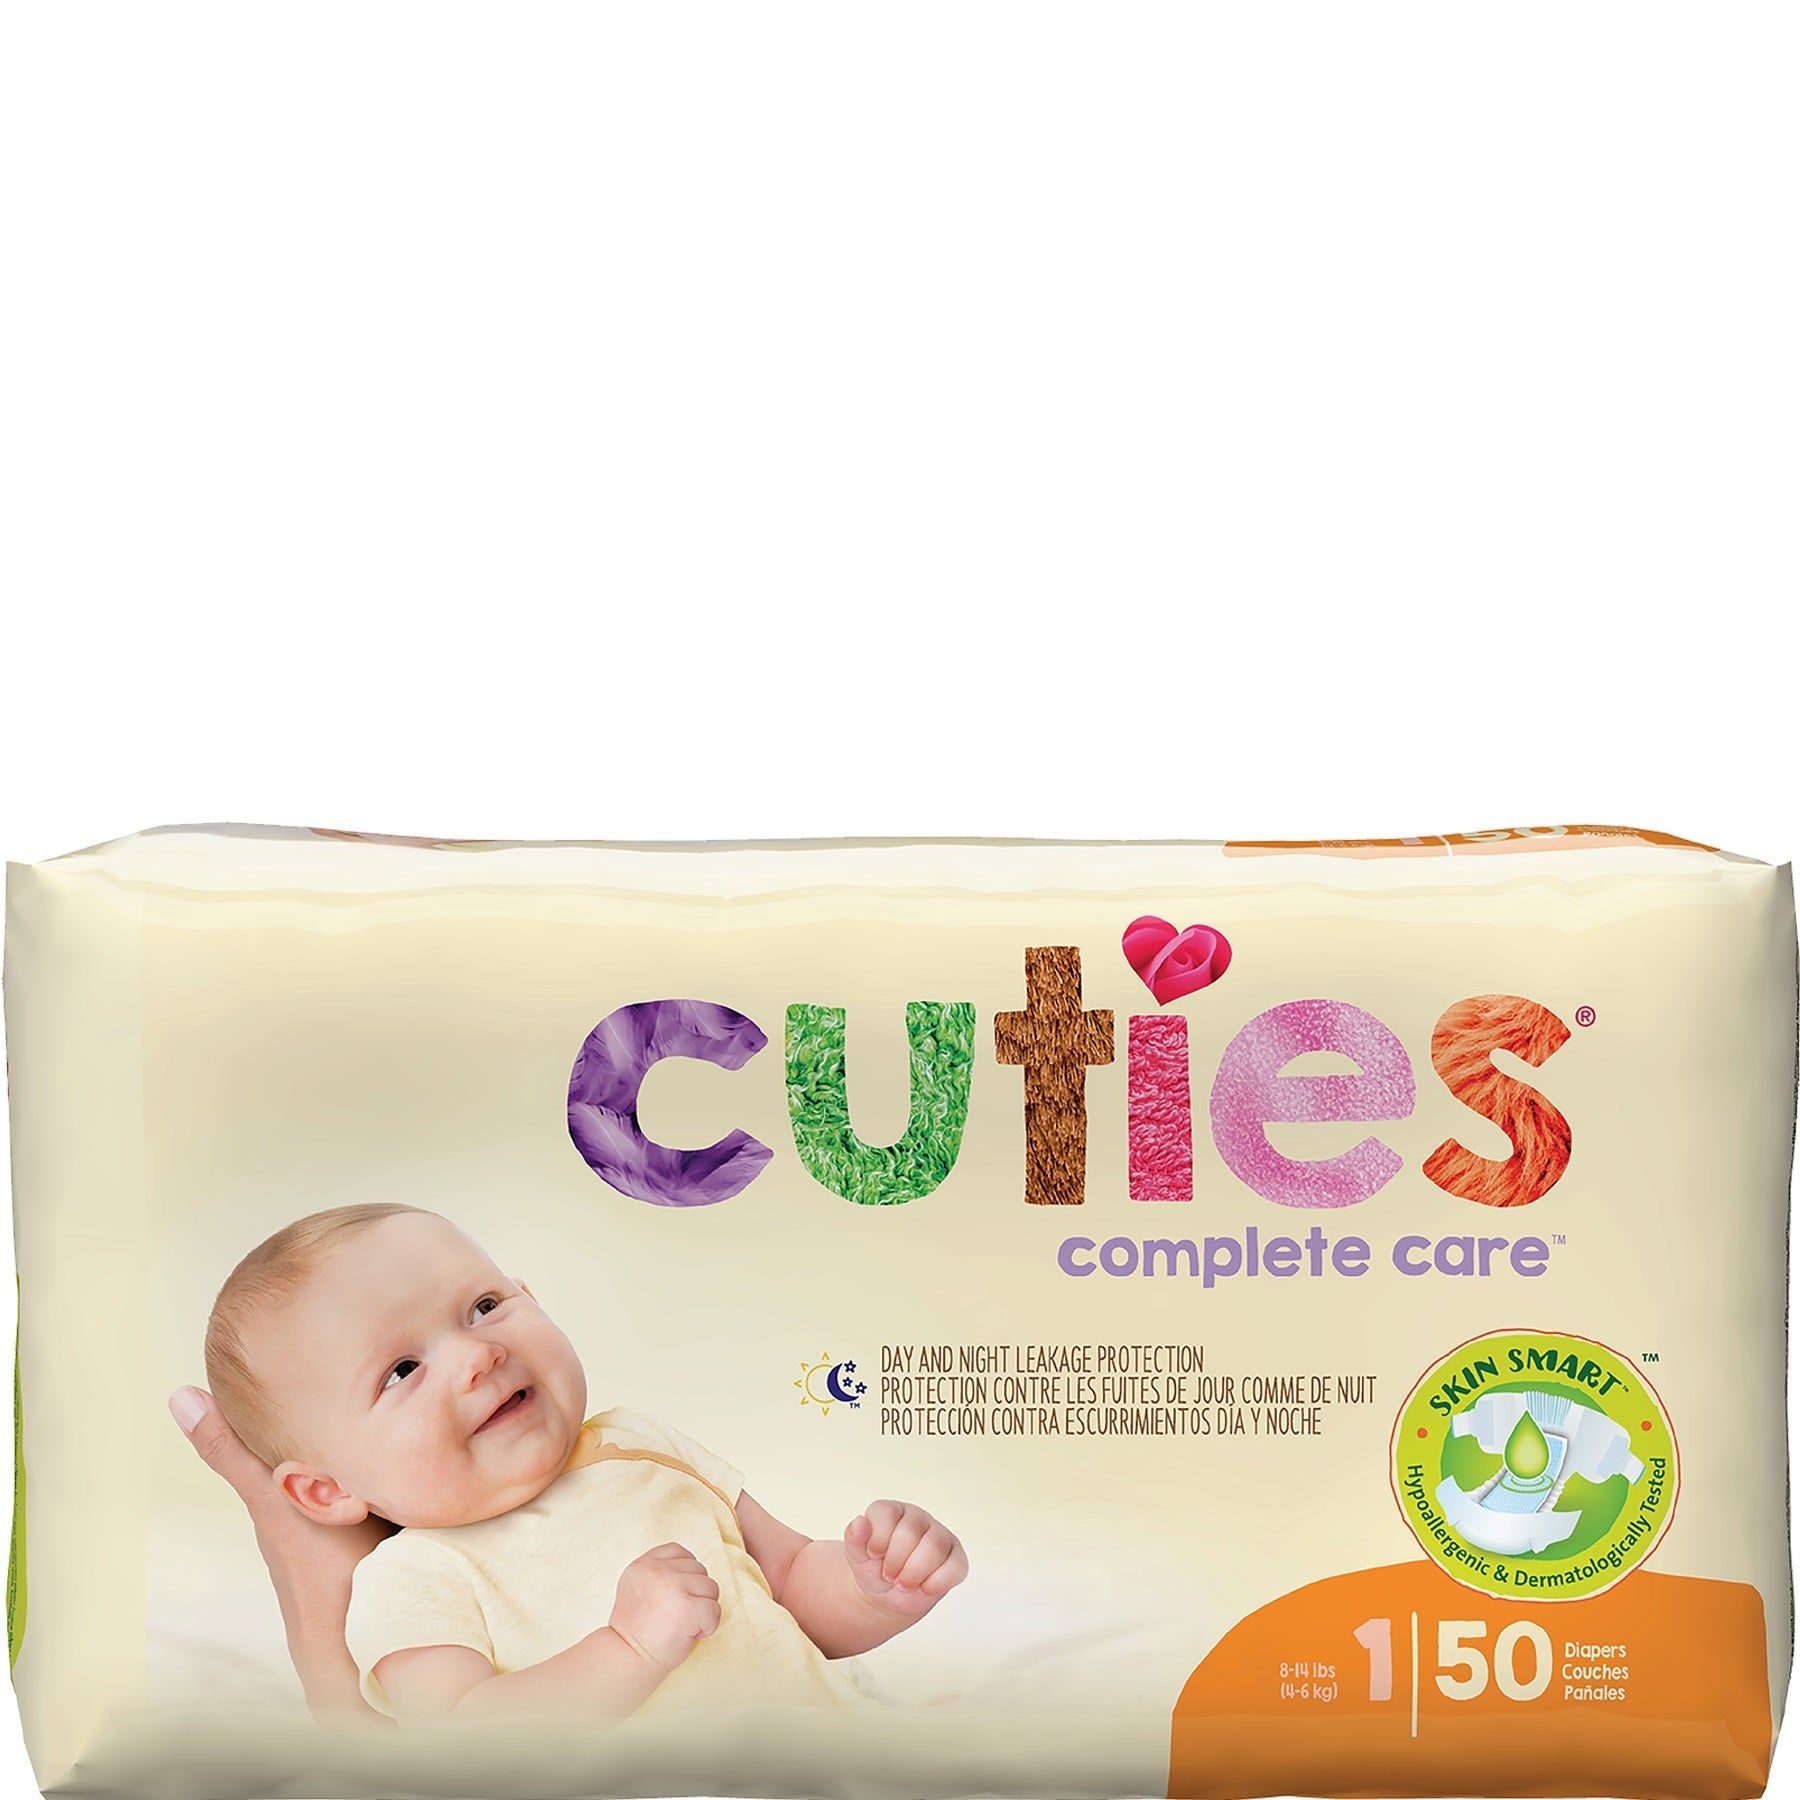 PK/50 - Cuties® Baby Diaper Size 1, 8 to 14 lb - Replaces: FQCCC01 - Best Buy Medical Supplies